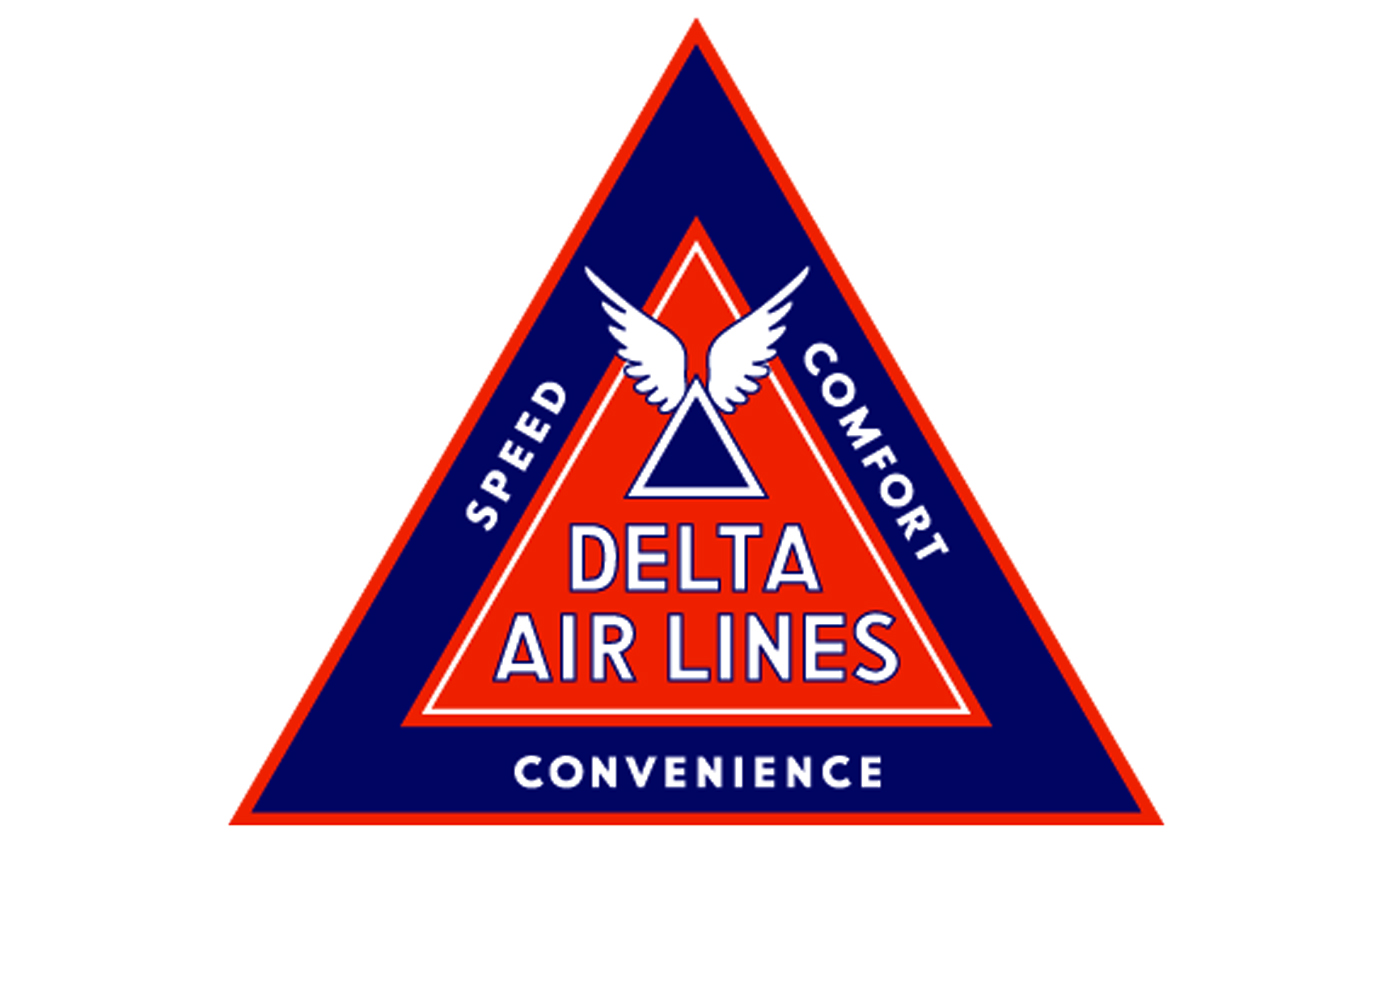 airline logos